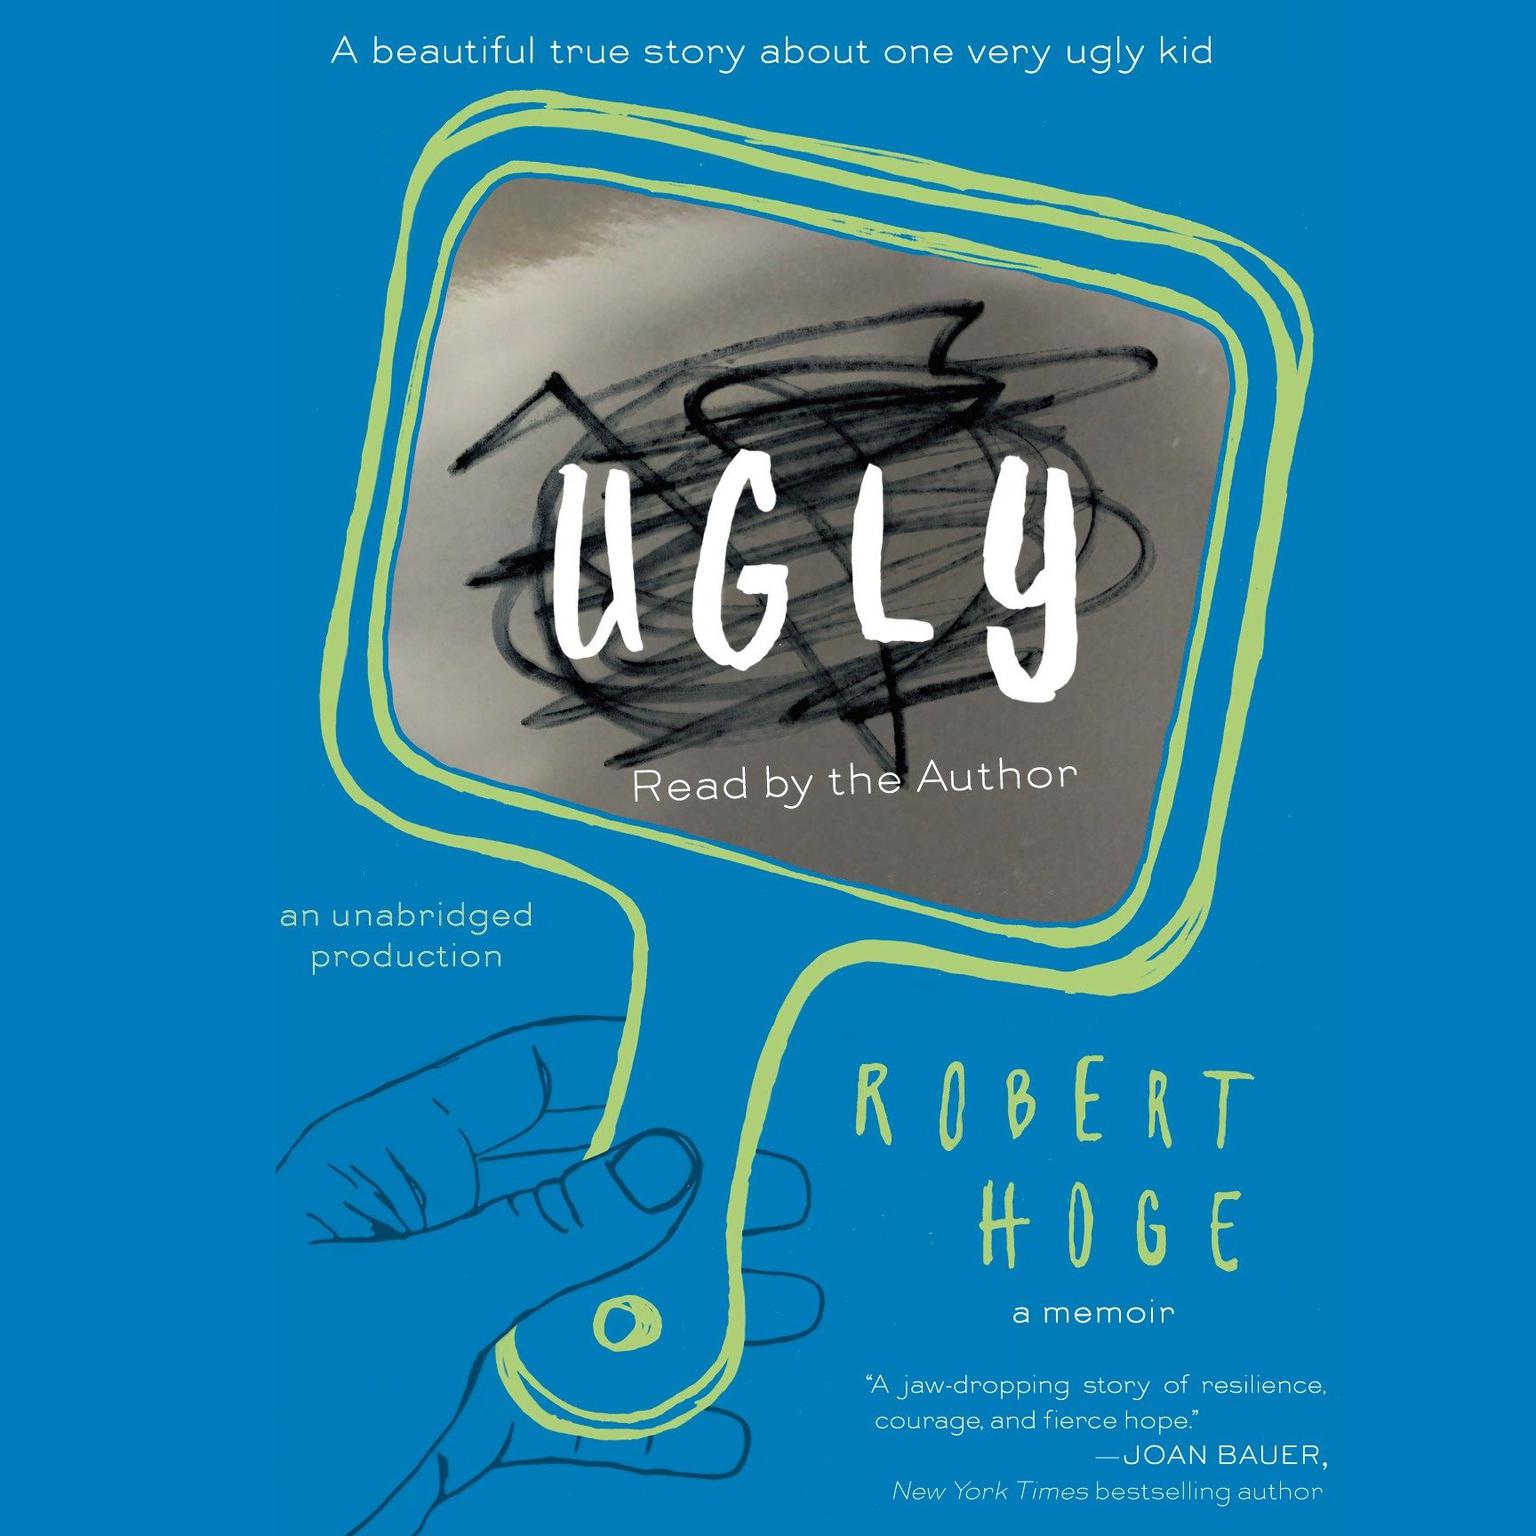 Ugly: A Beautiful True Story about One Very Ugly Kid Audiobook, by Robert Hoge